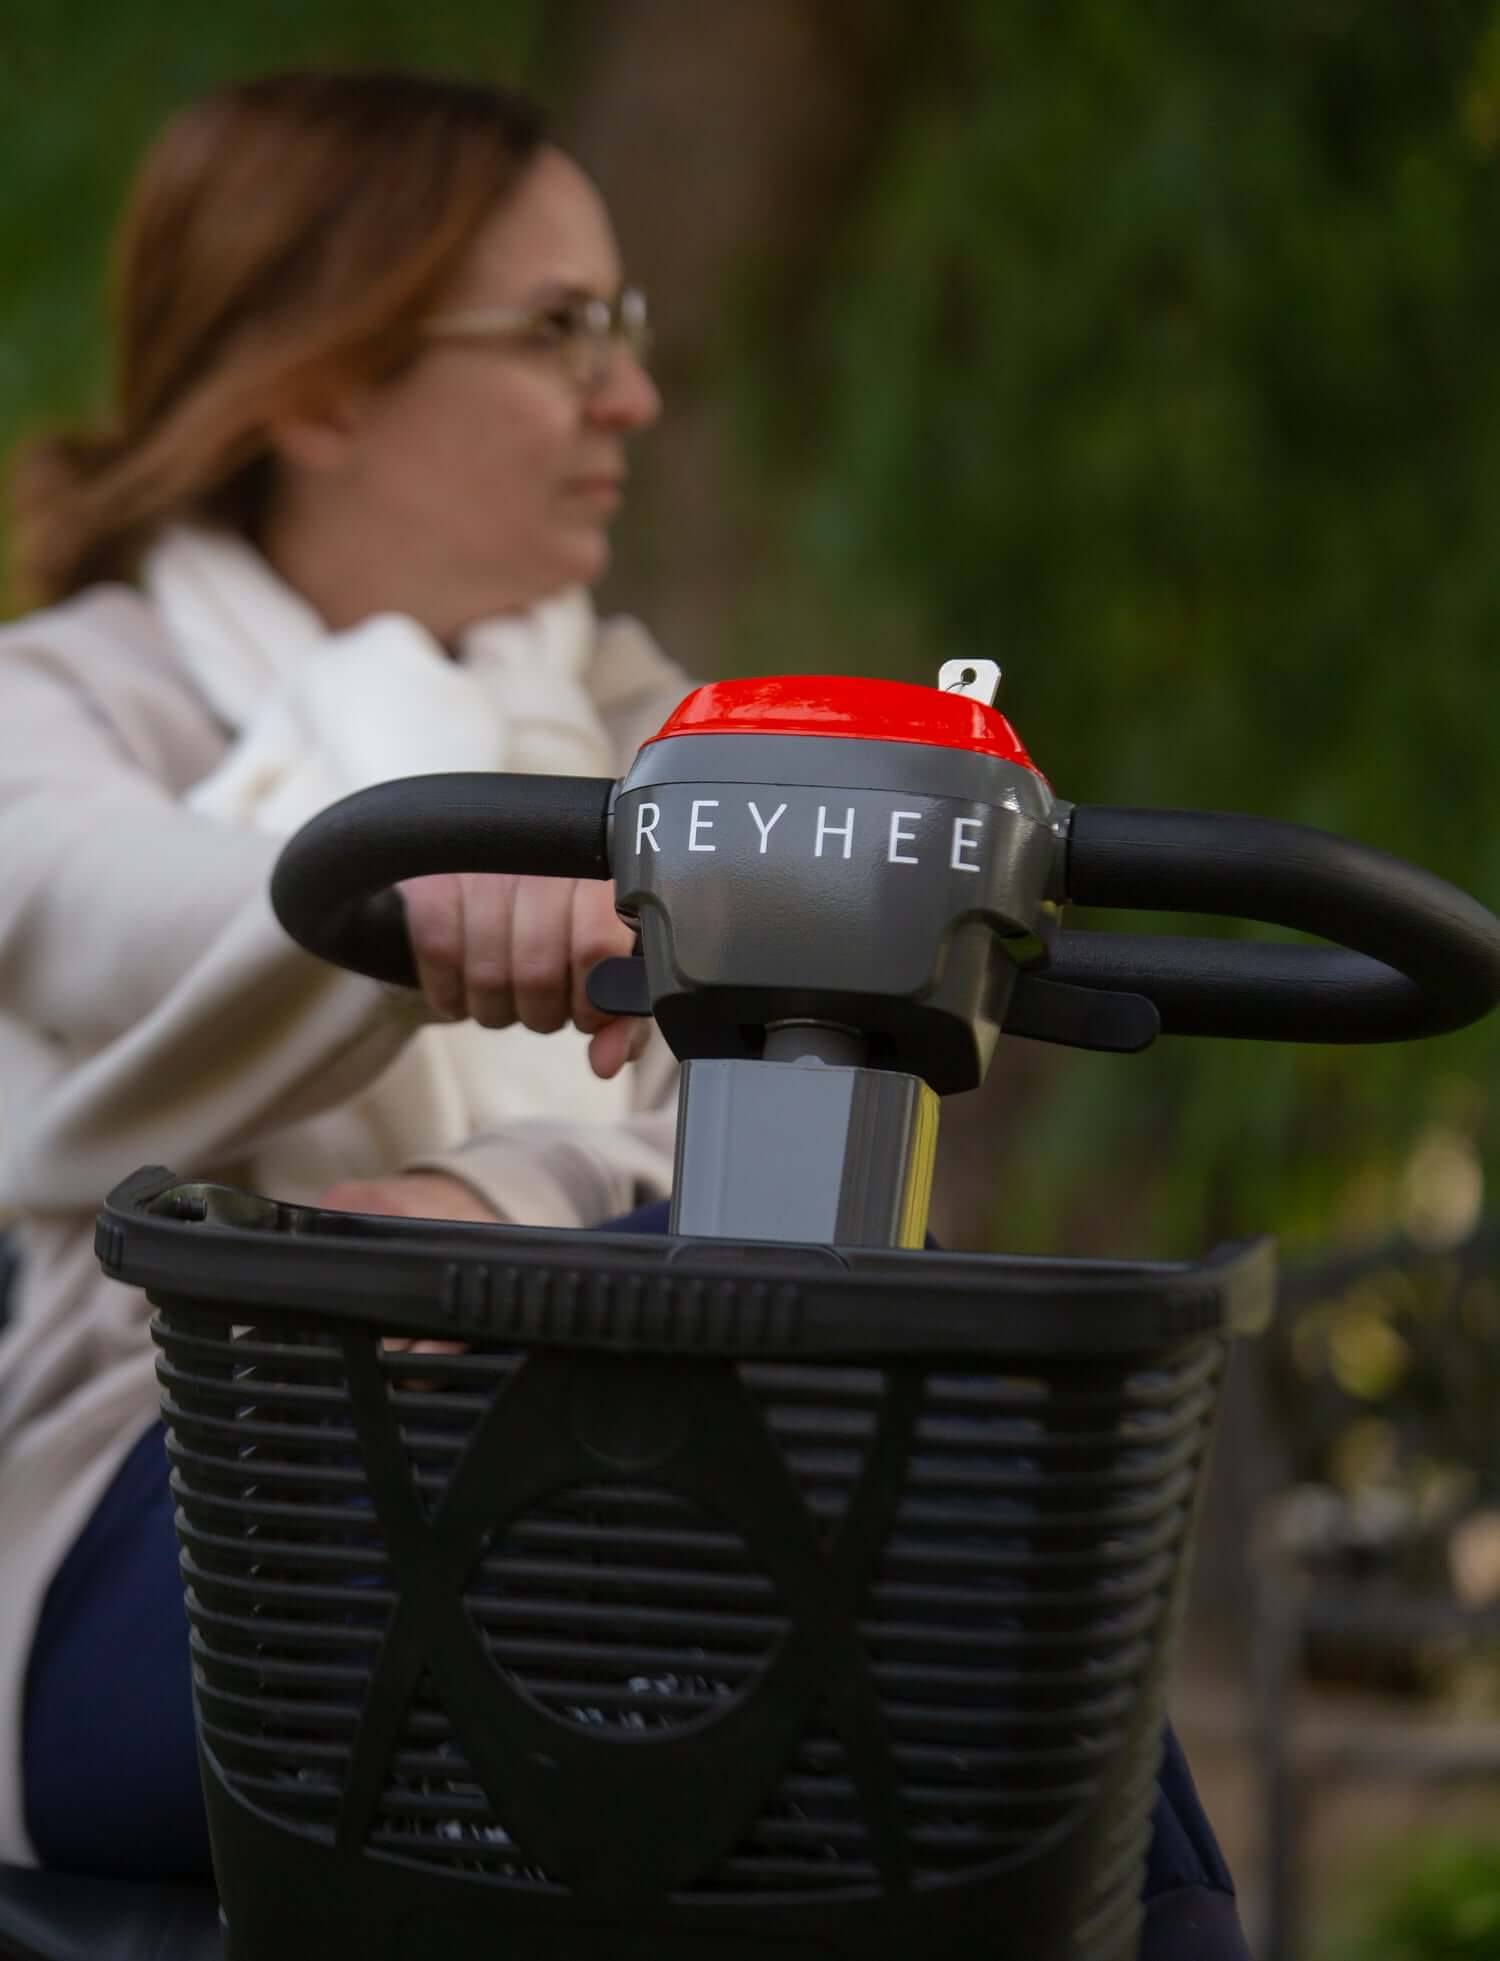 Reeyhee  Electric Mobility Scooter